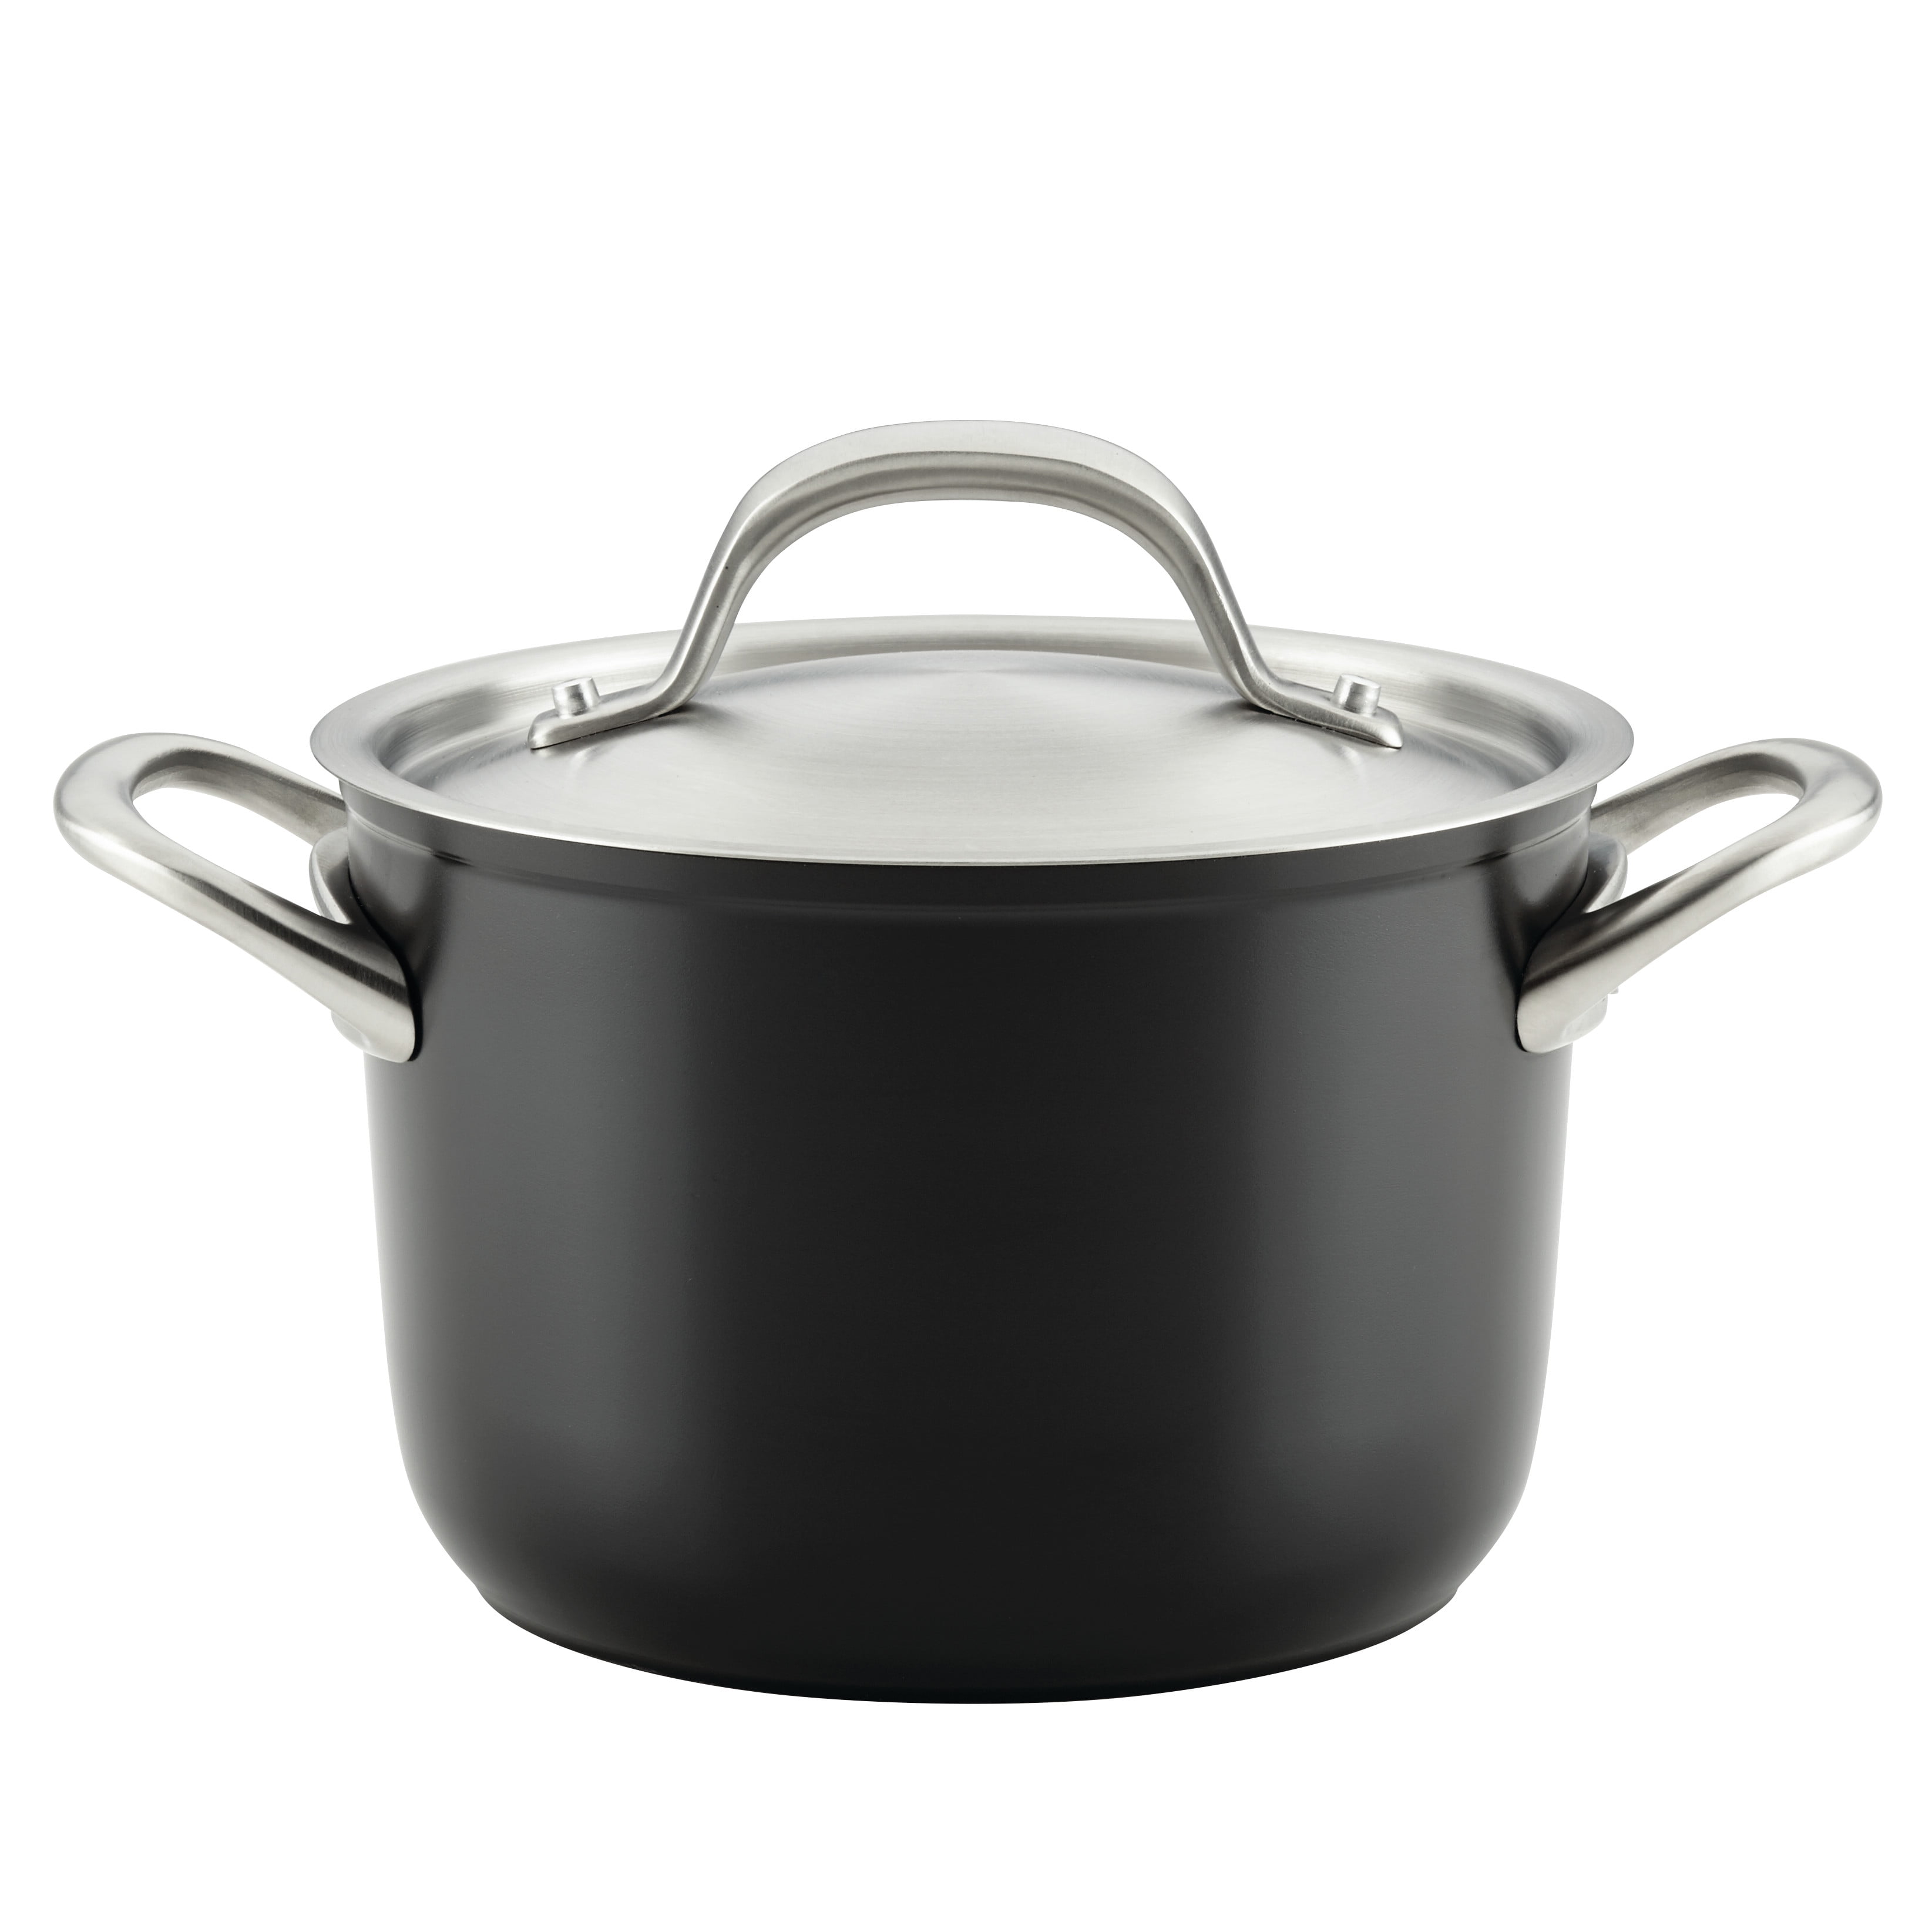 HexClad Hybrid 8 QT Pot With Lid - Silver - 130 requests